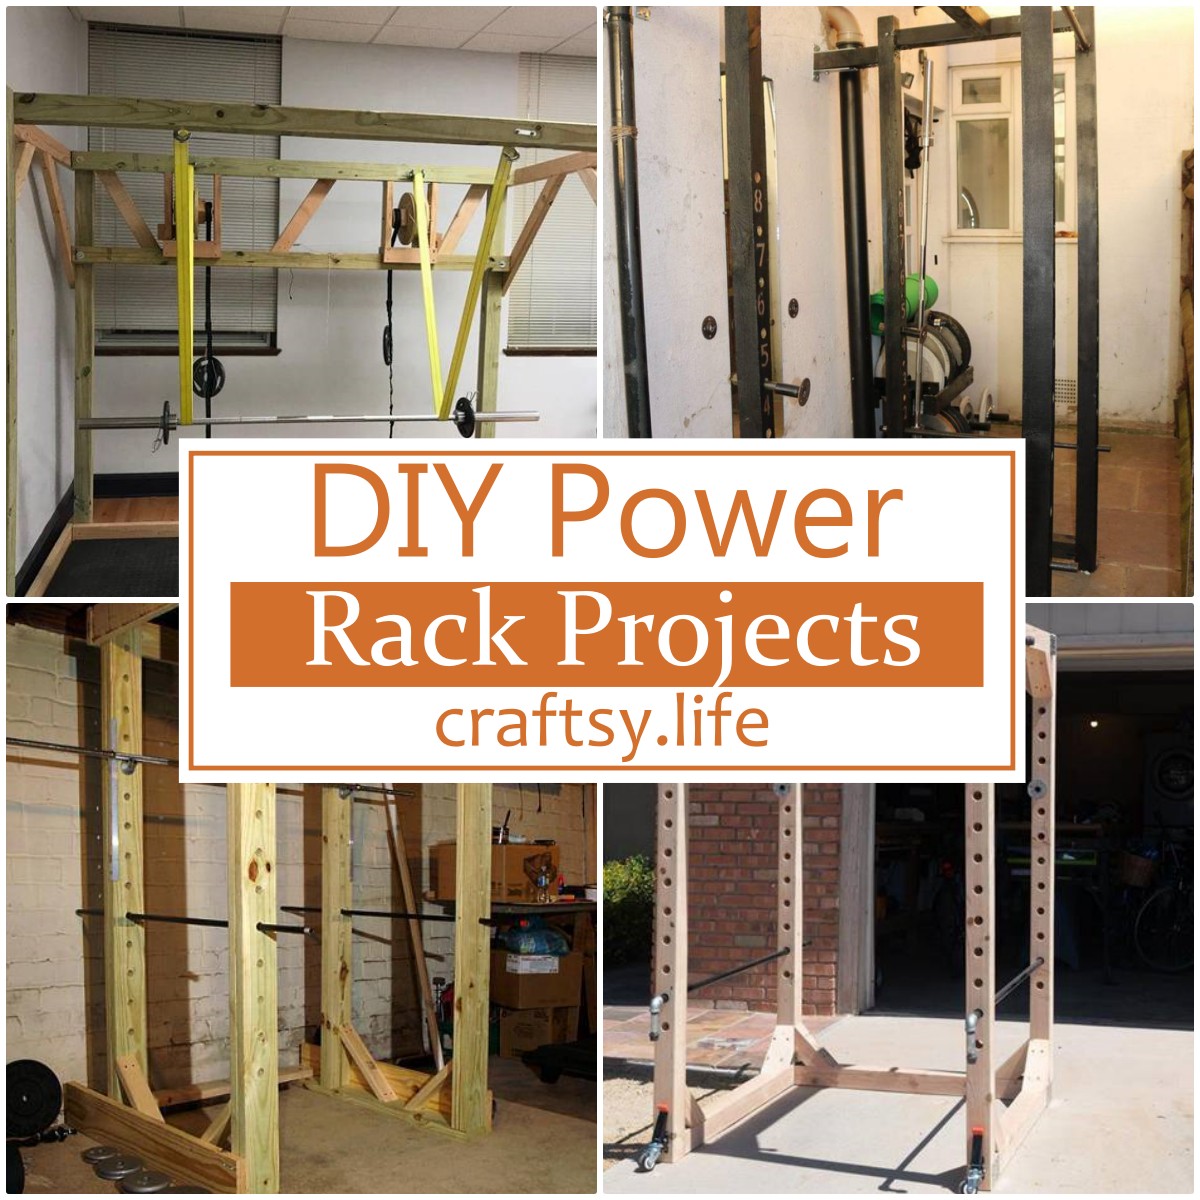 DIY Power Rack Projects